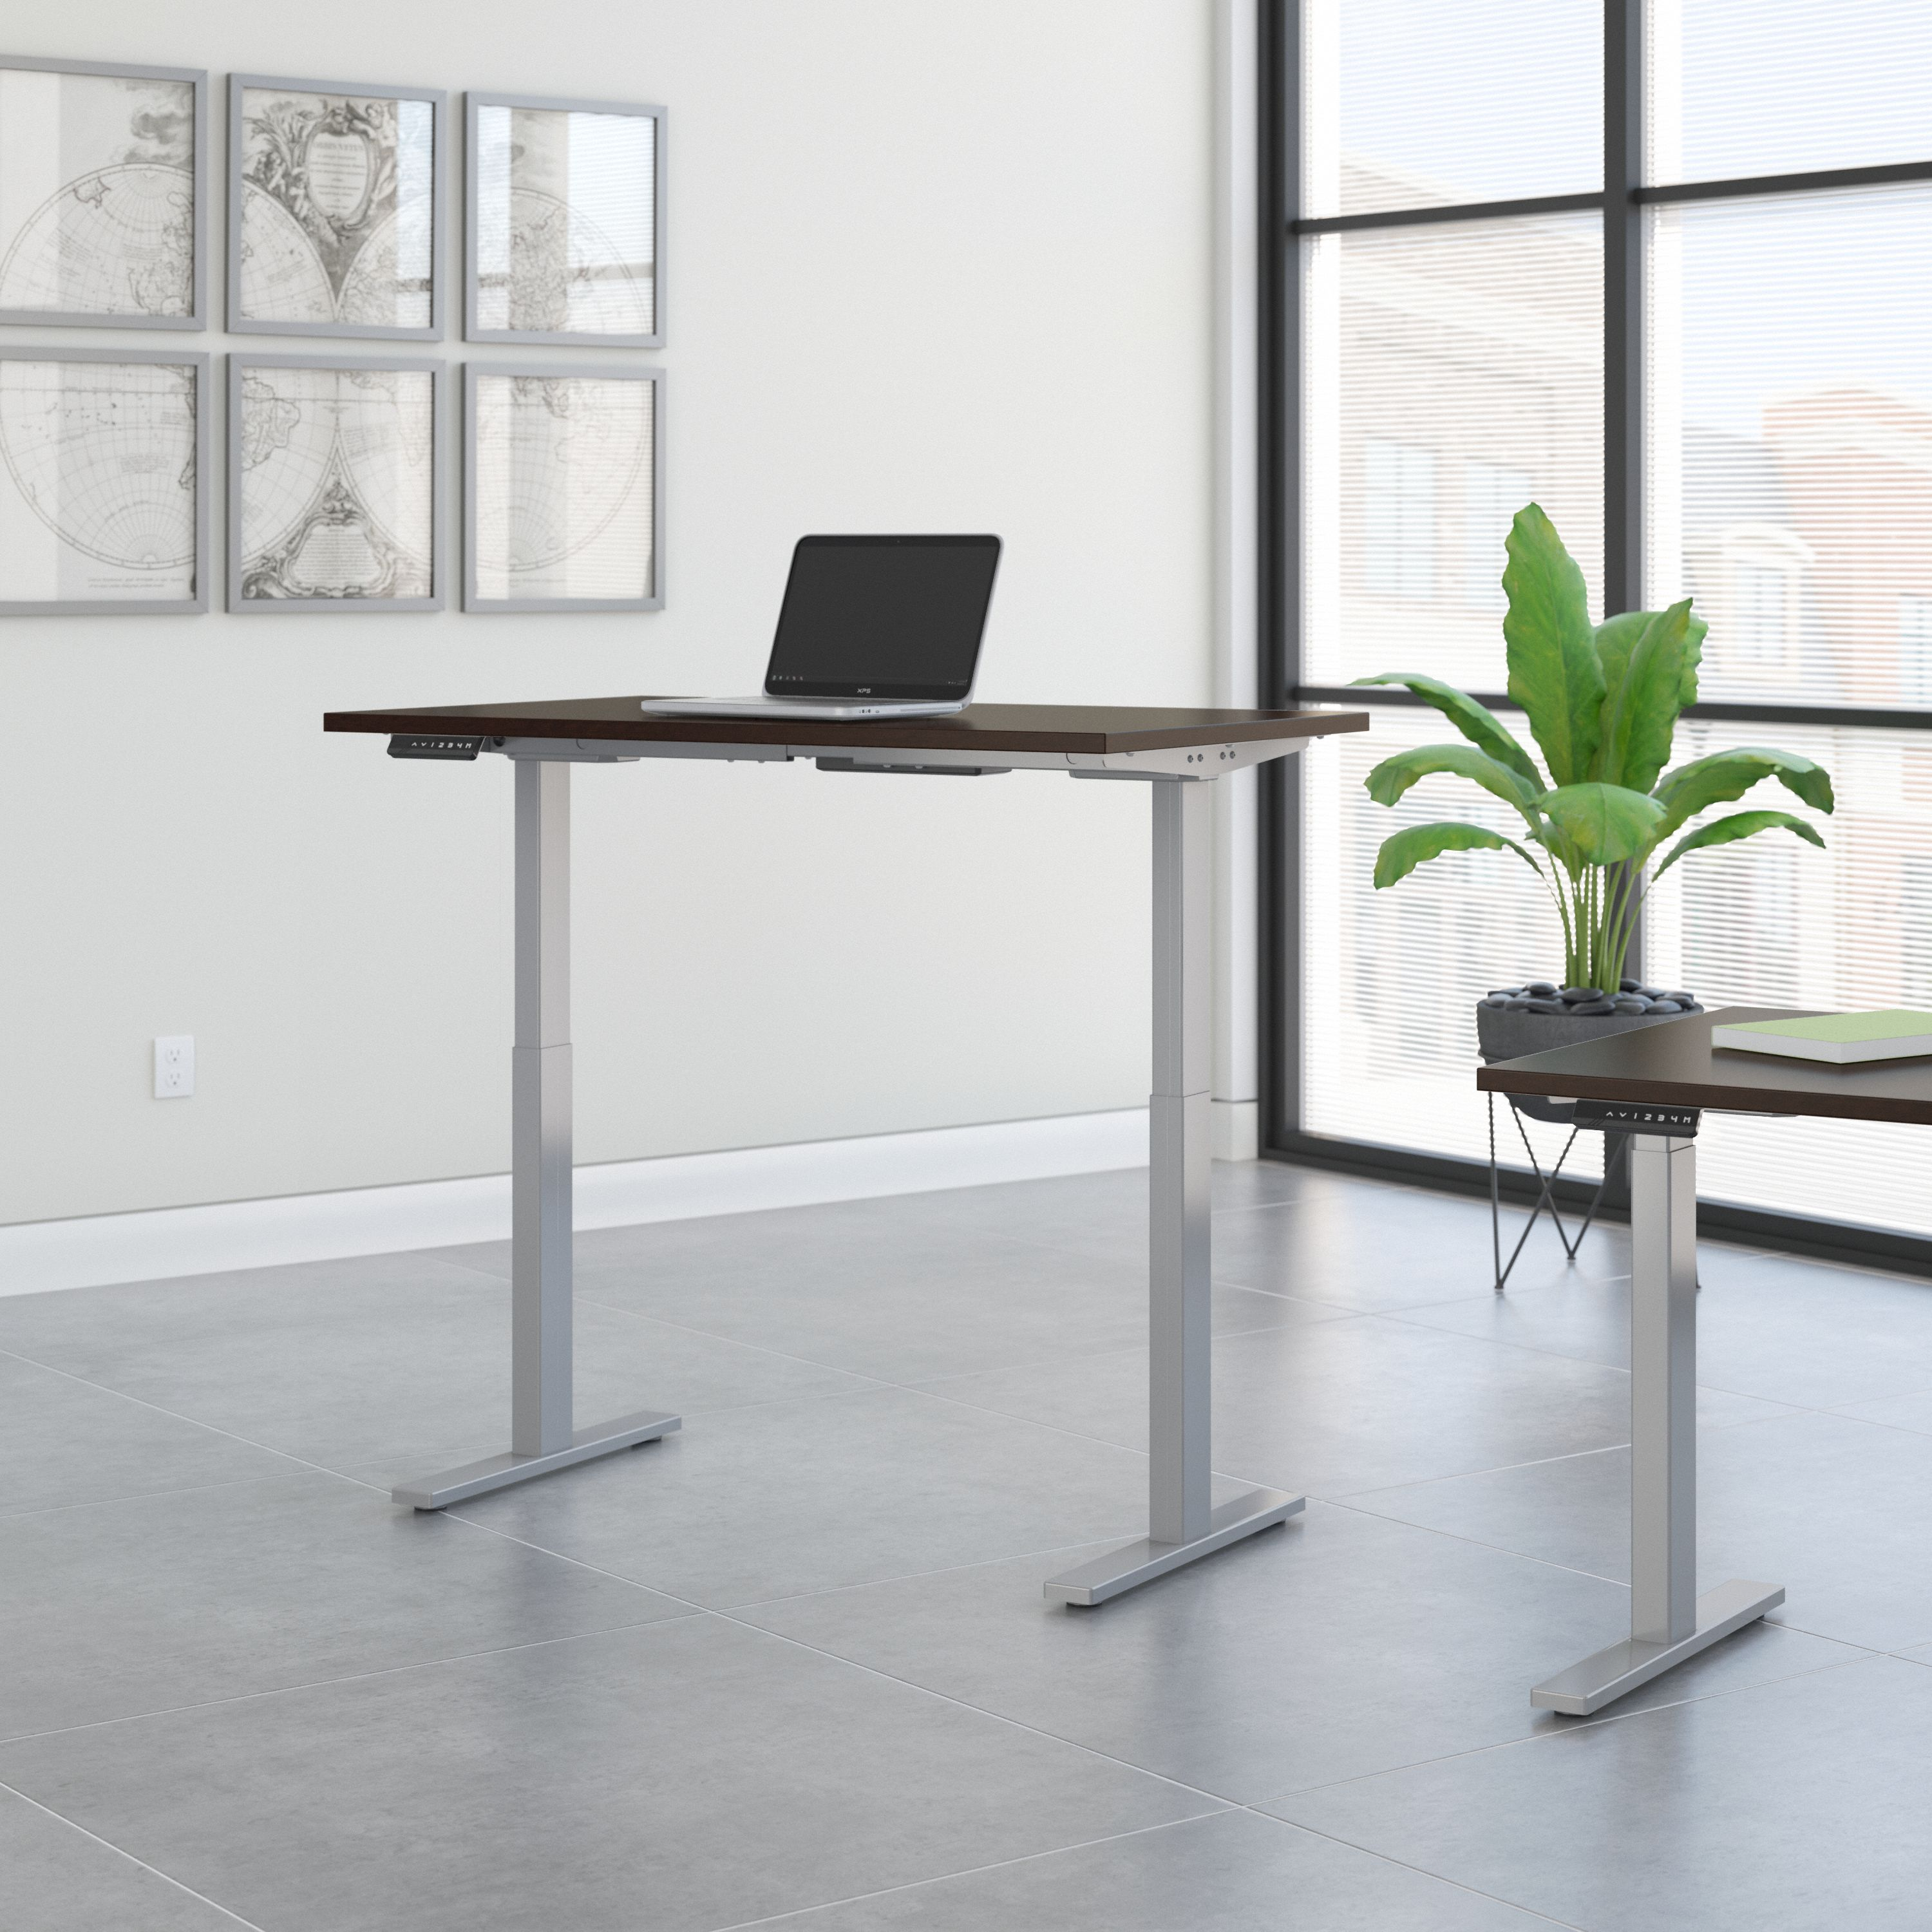 Shop Move 60 Series by Bush Business Furniture 48W x 24D Height Adjustable Standing Desk 01 M6S4824MRSK #color_mocha cherry/cool gray metallic